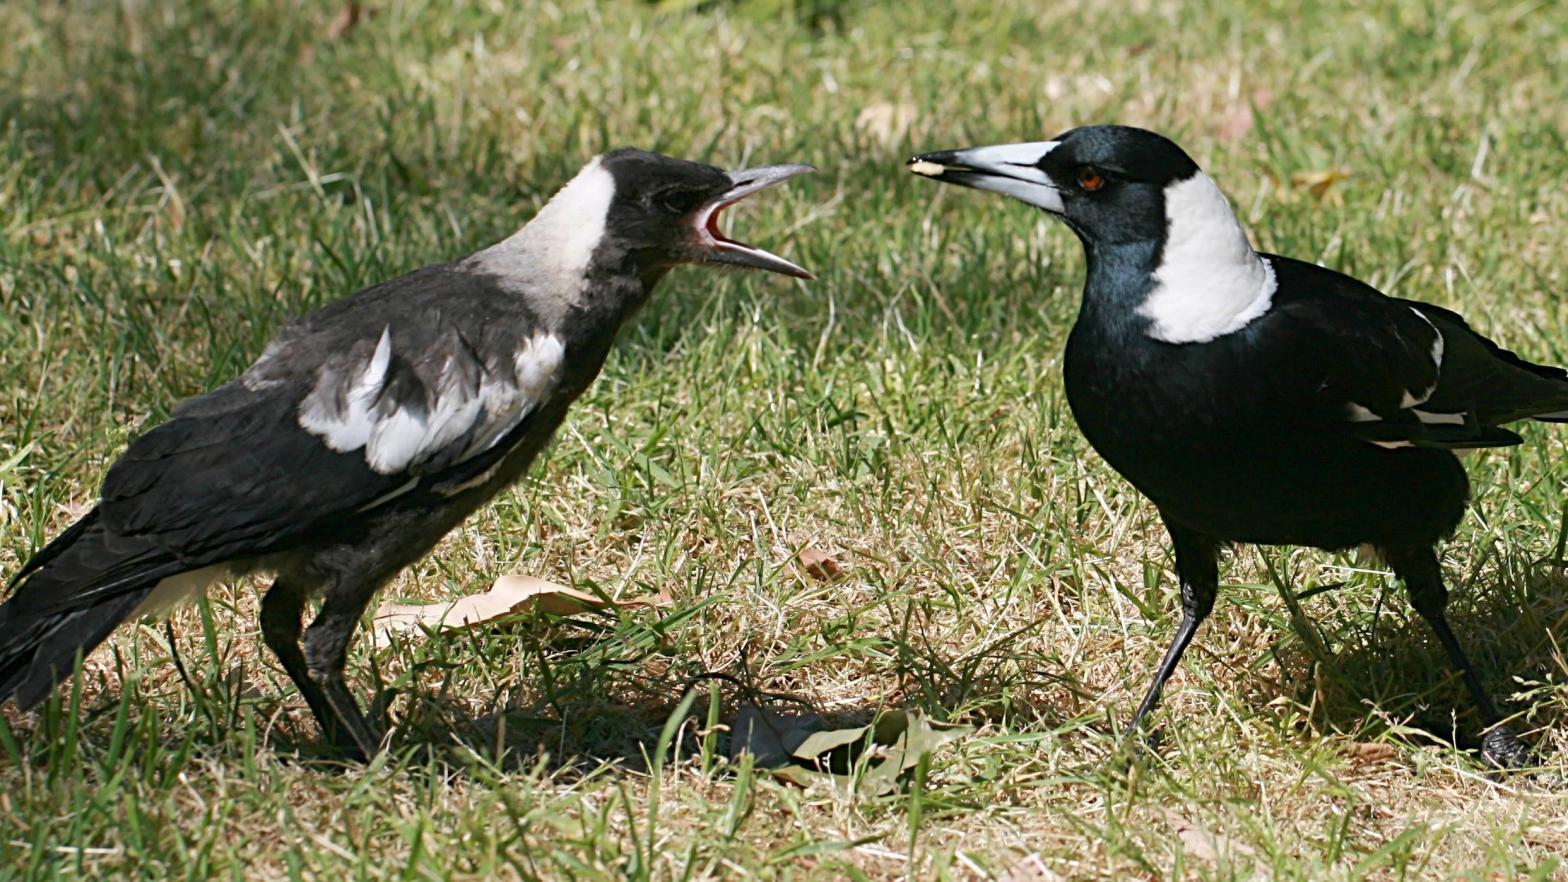 Australian magpies (not ones involved in the new study). (Photo: Toby Hudson, Fair Use)